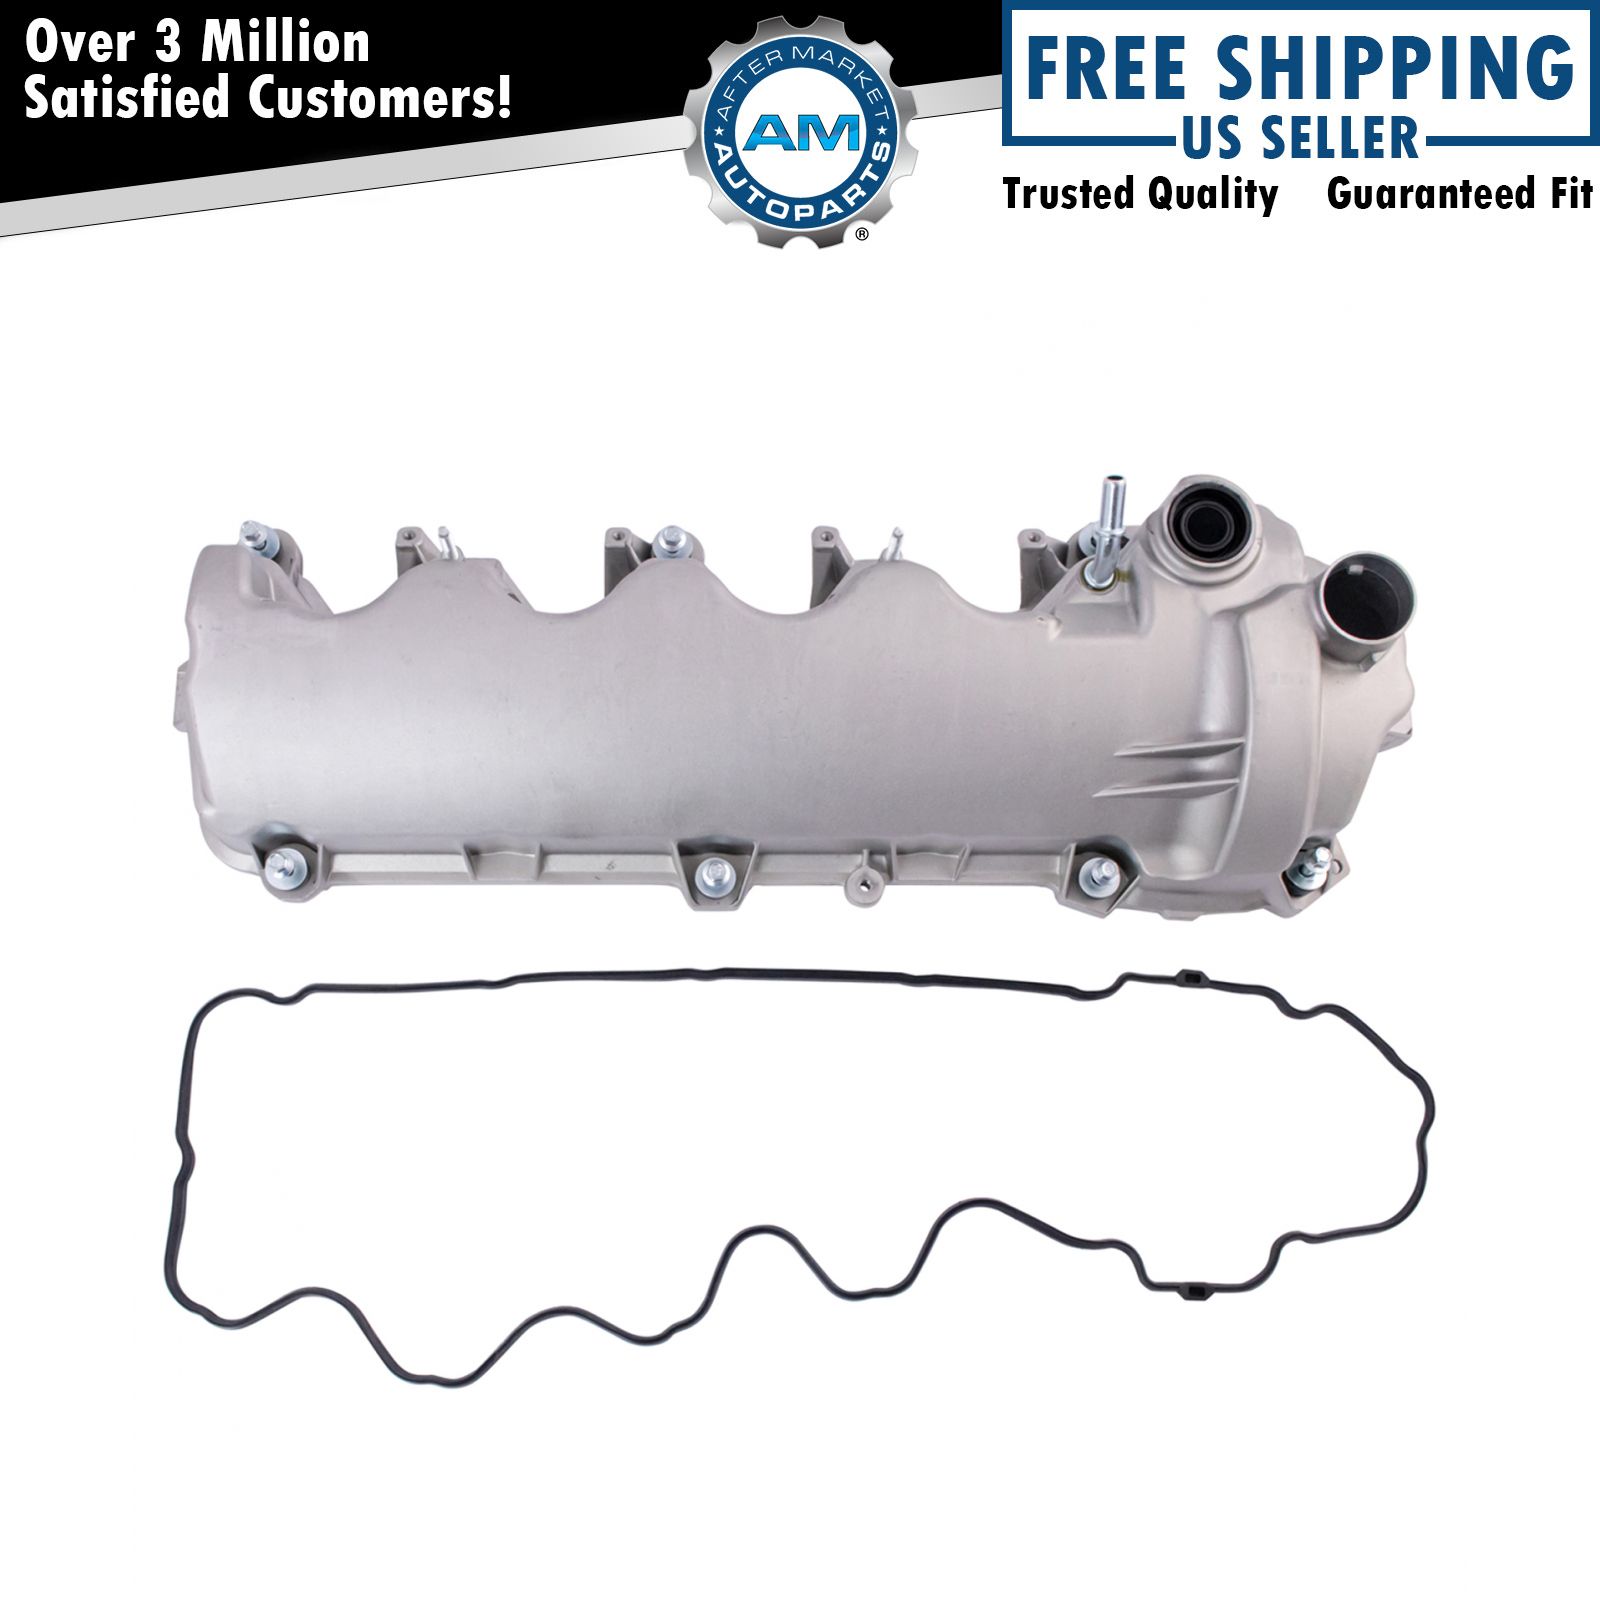 Dorman 264-908 Engine Valve Cover with Gaskets RH for Ford 4.6L 5.4L New